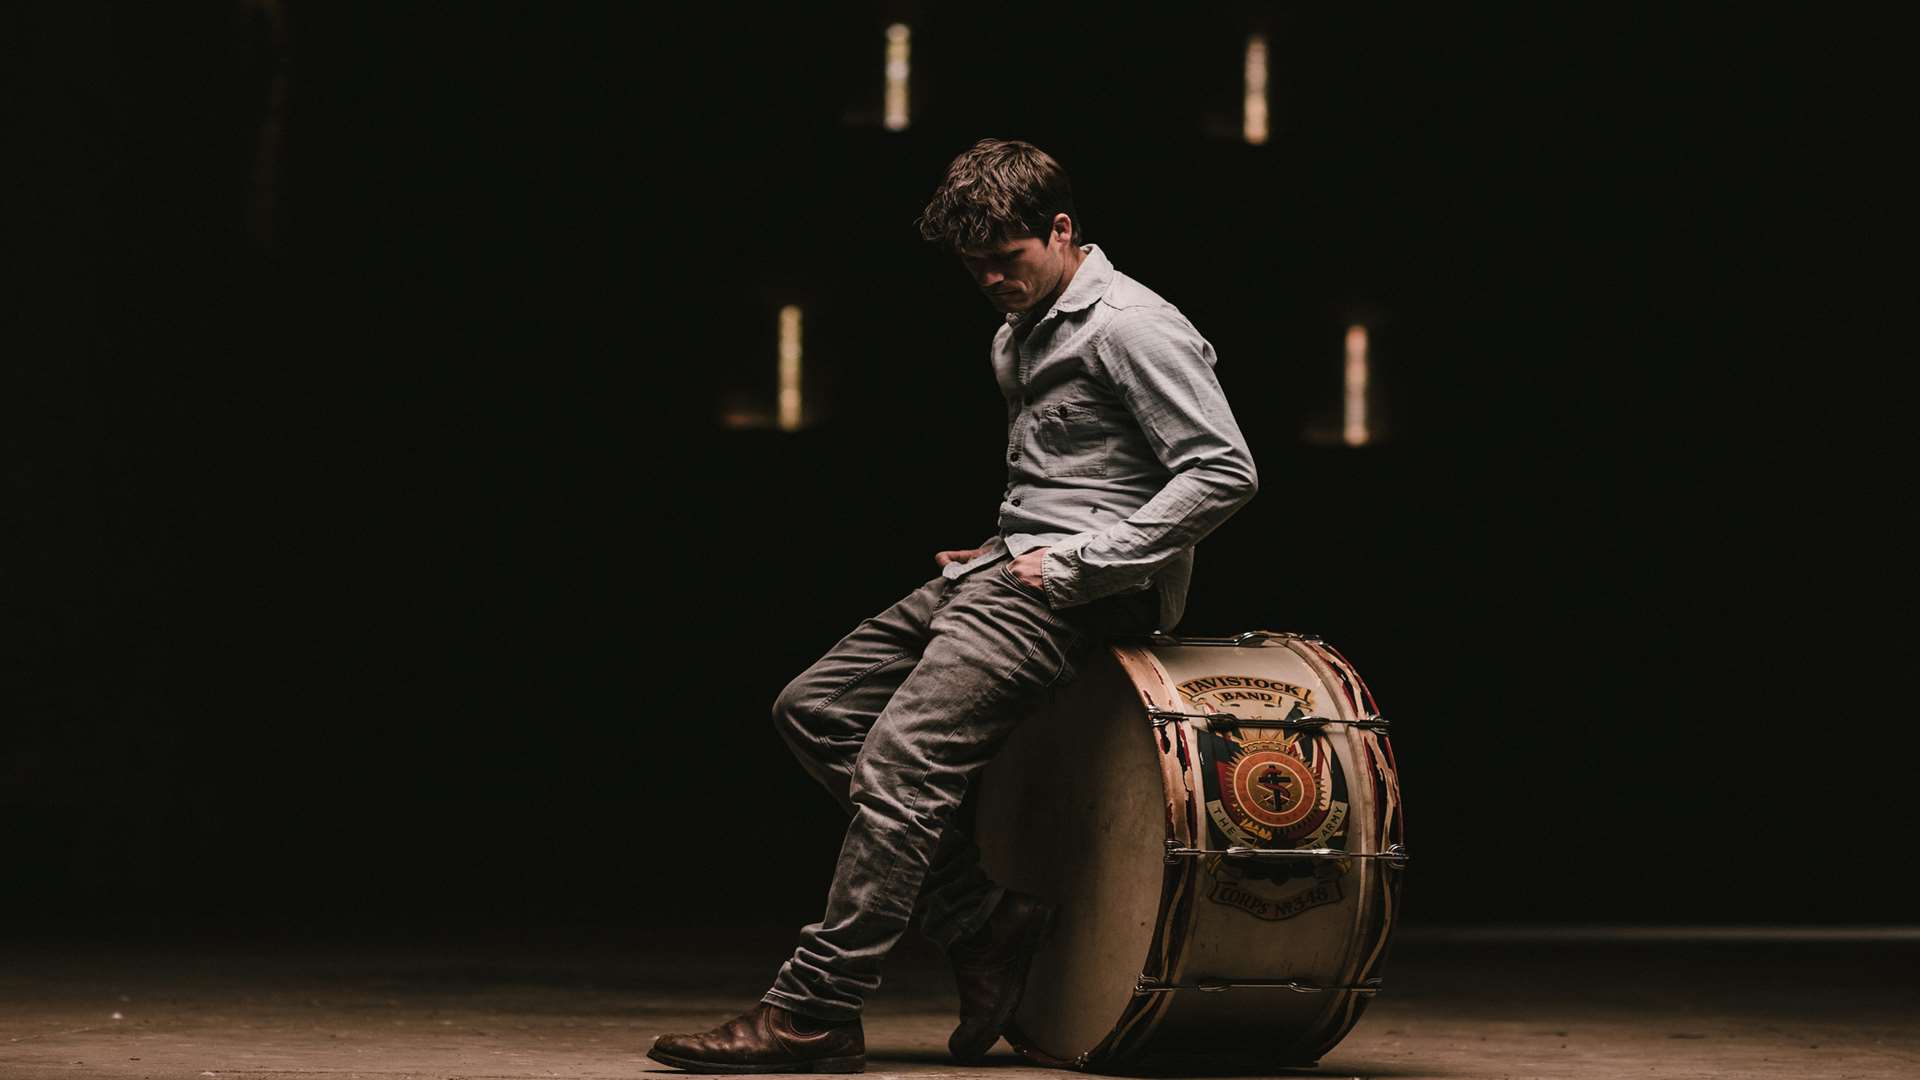 Seth Lakeman will be at the Rye festival